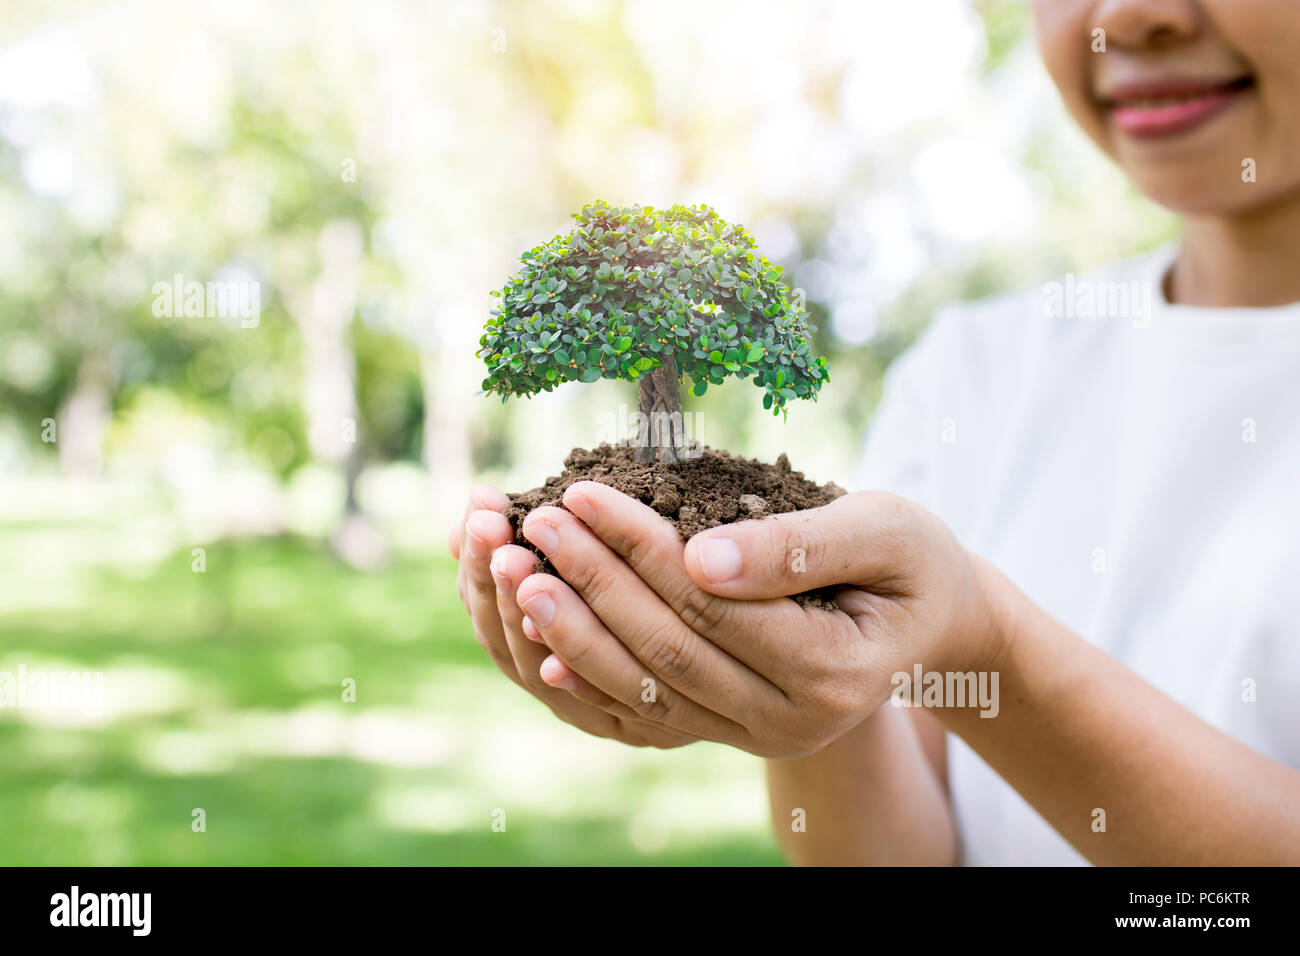 World environment day and save environment concept, volunteer women holding small plant growing, sapling Stock Photo